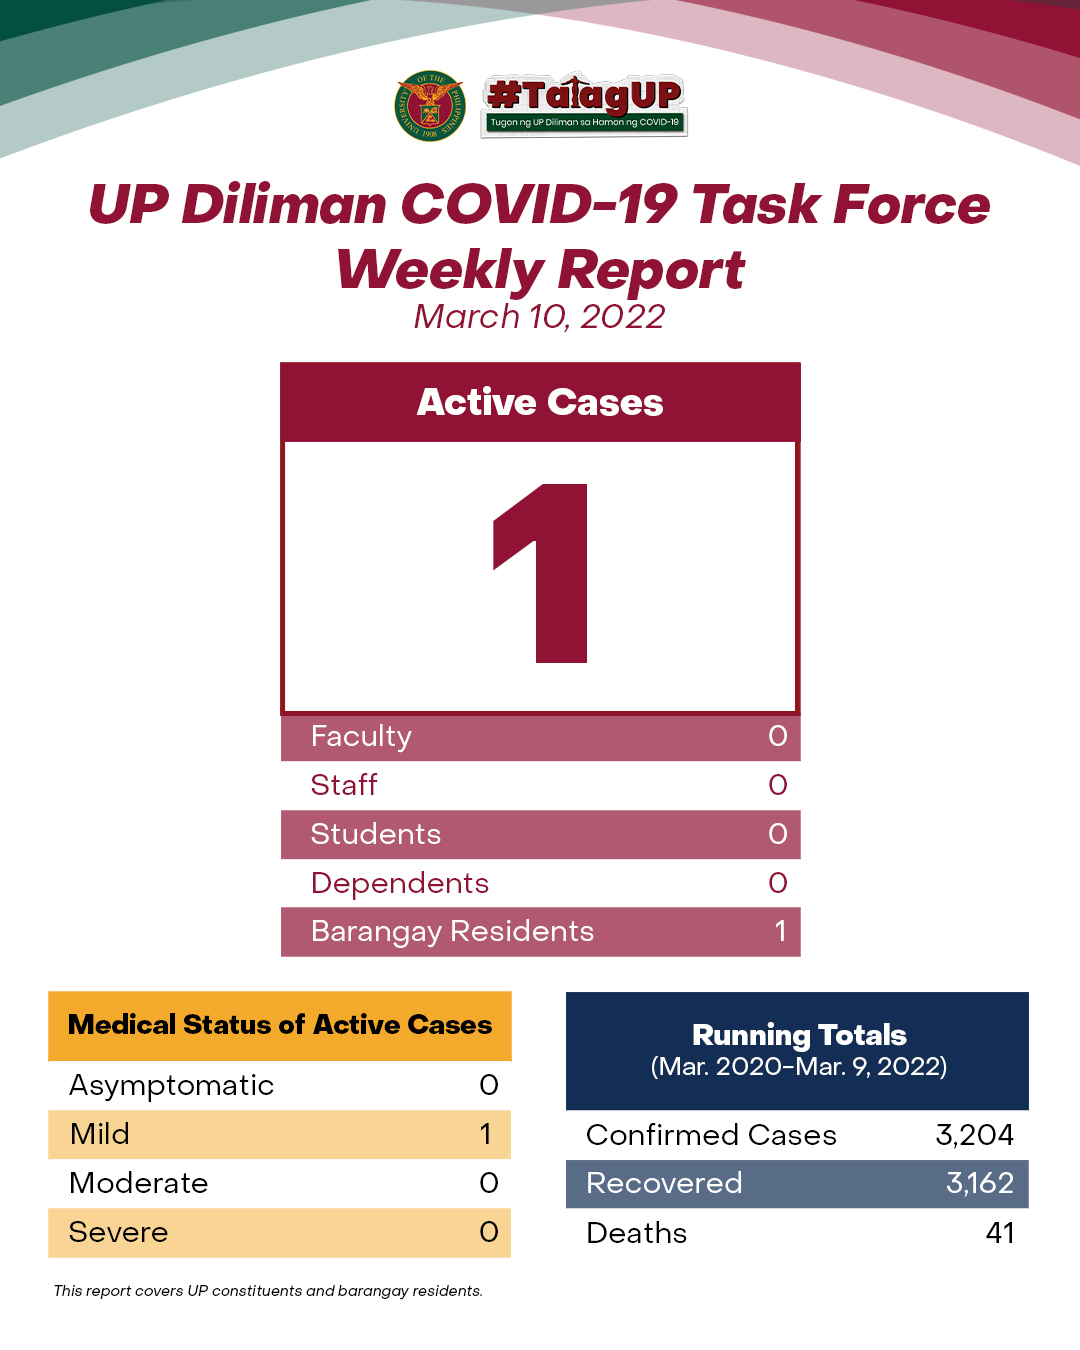 UP Diliman COVID-19 Task Force Weekly Report (March 10, 2022)